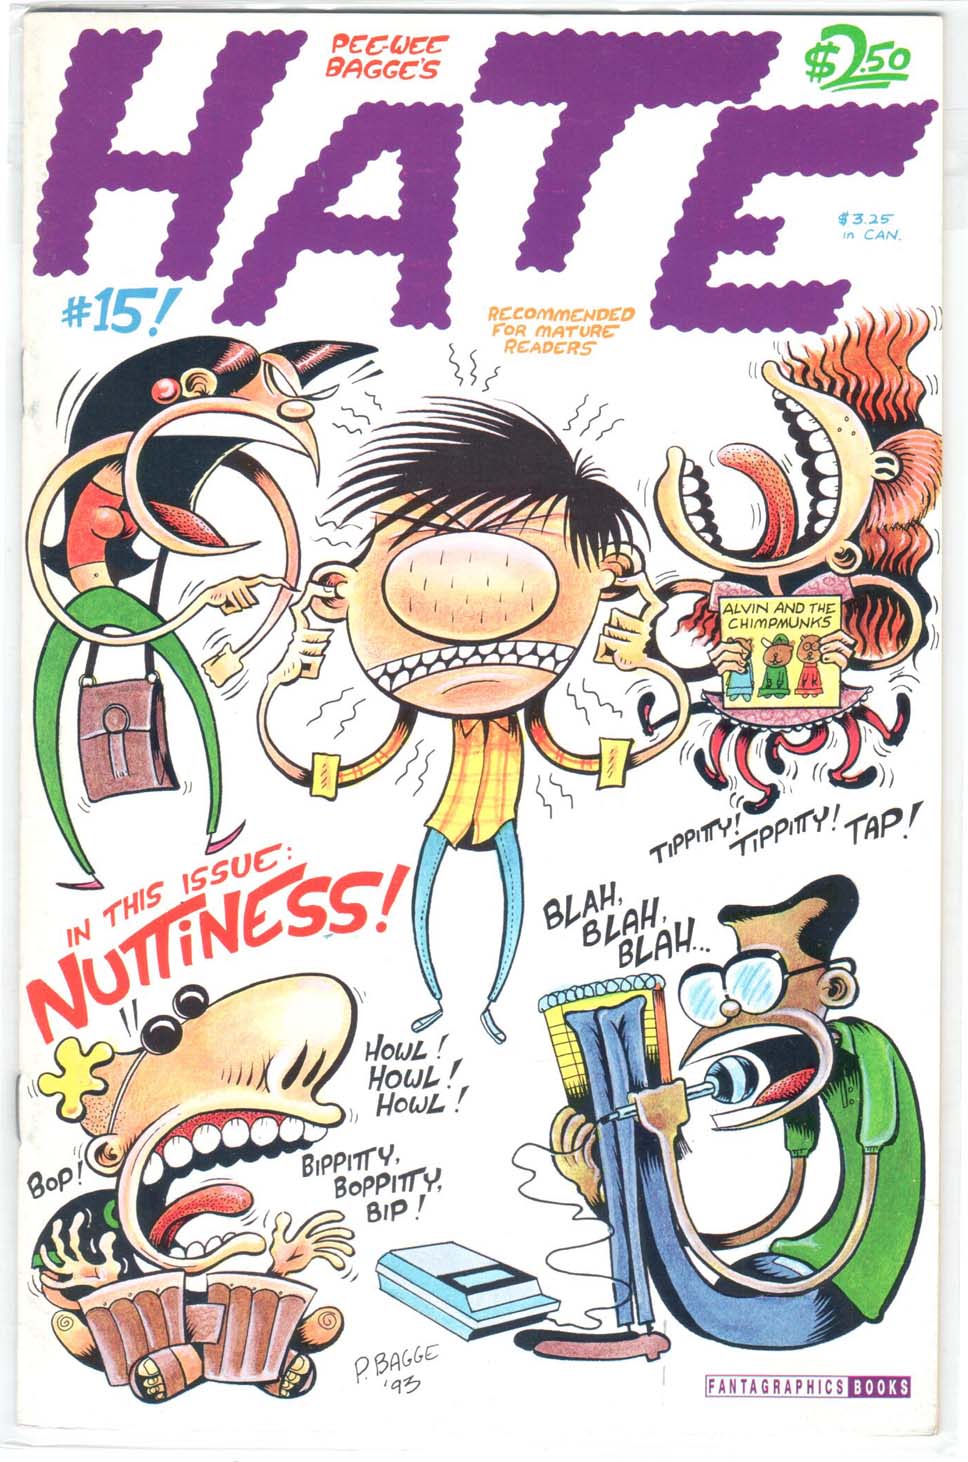 Hate (1990) #15